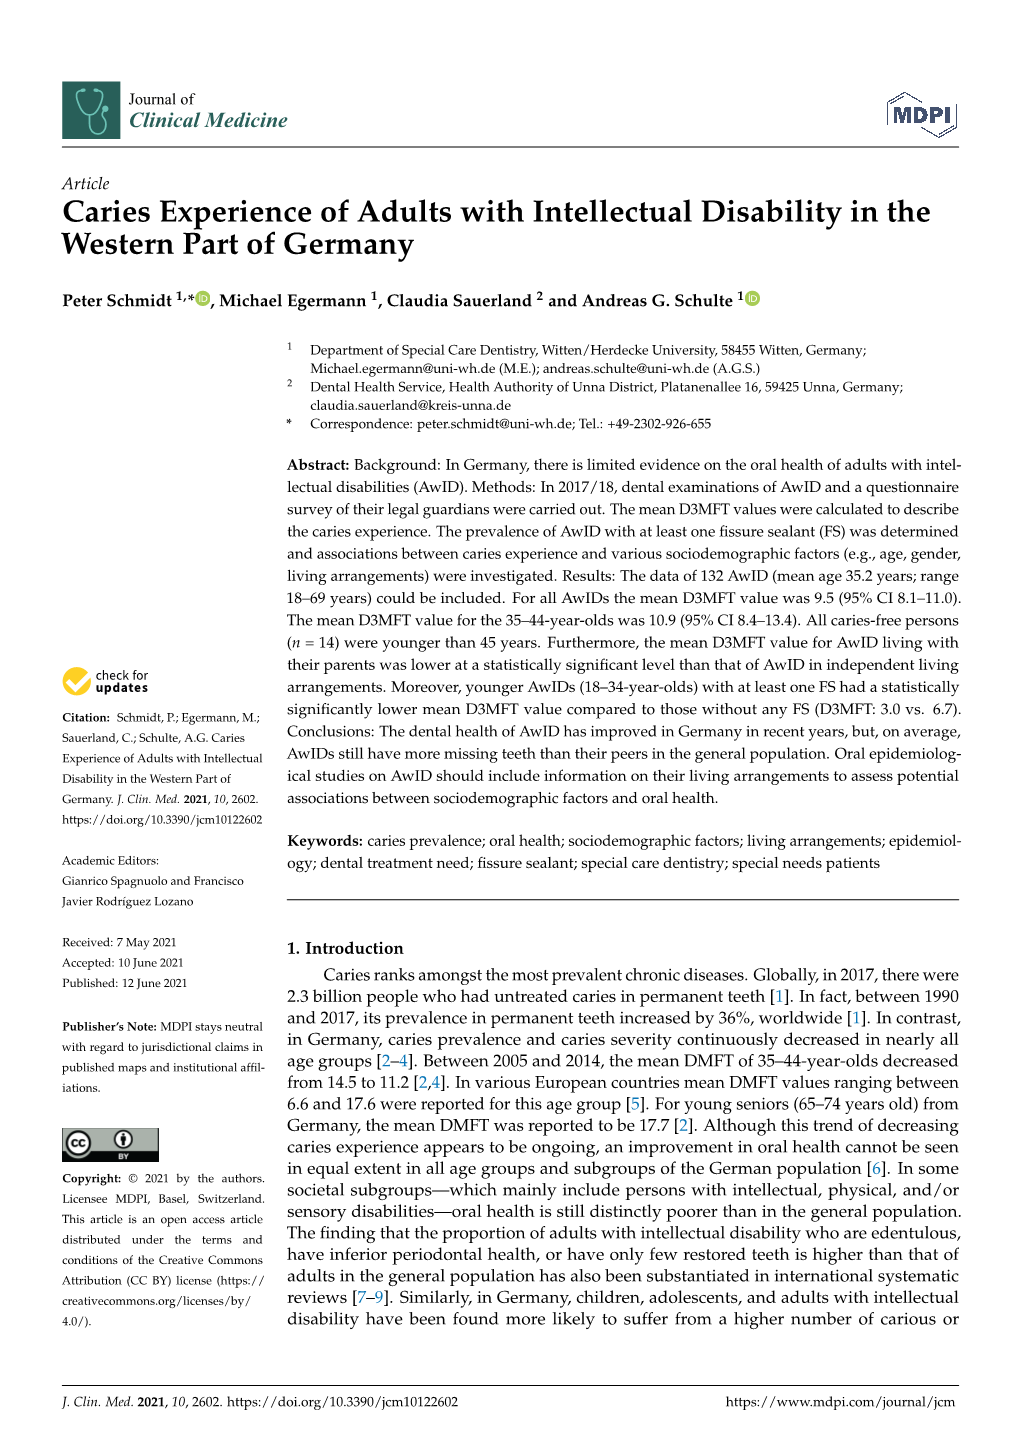 Caries Experience of Adults with Intellectual Disability in the Western Part of Germany